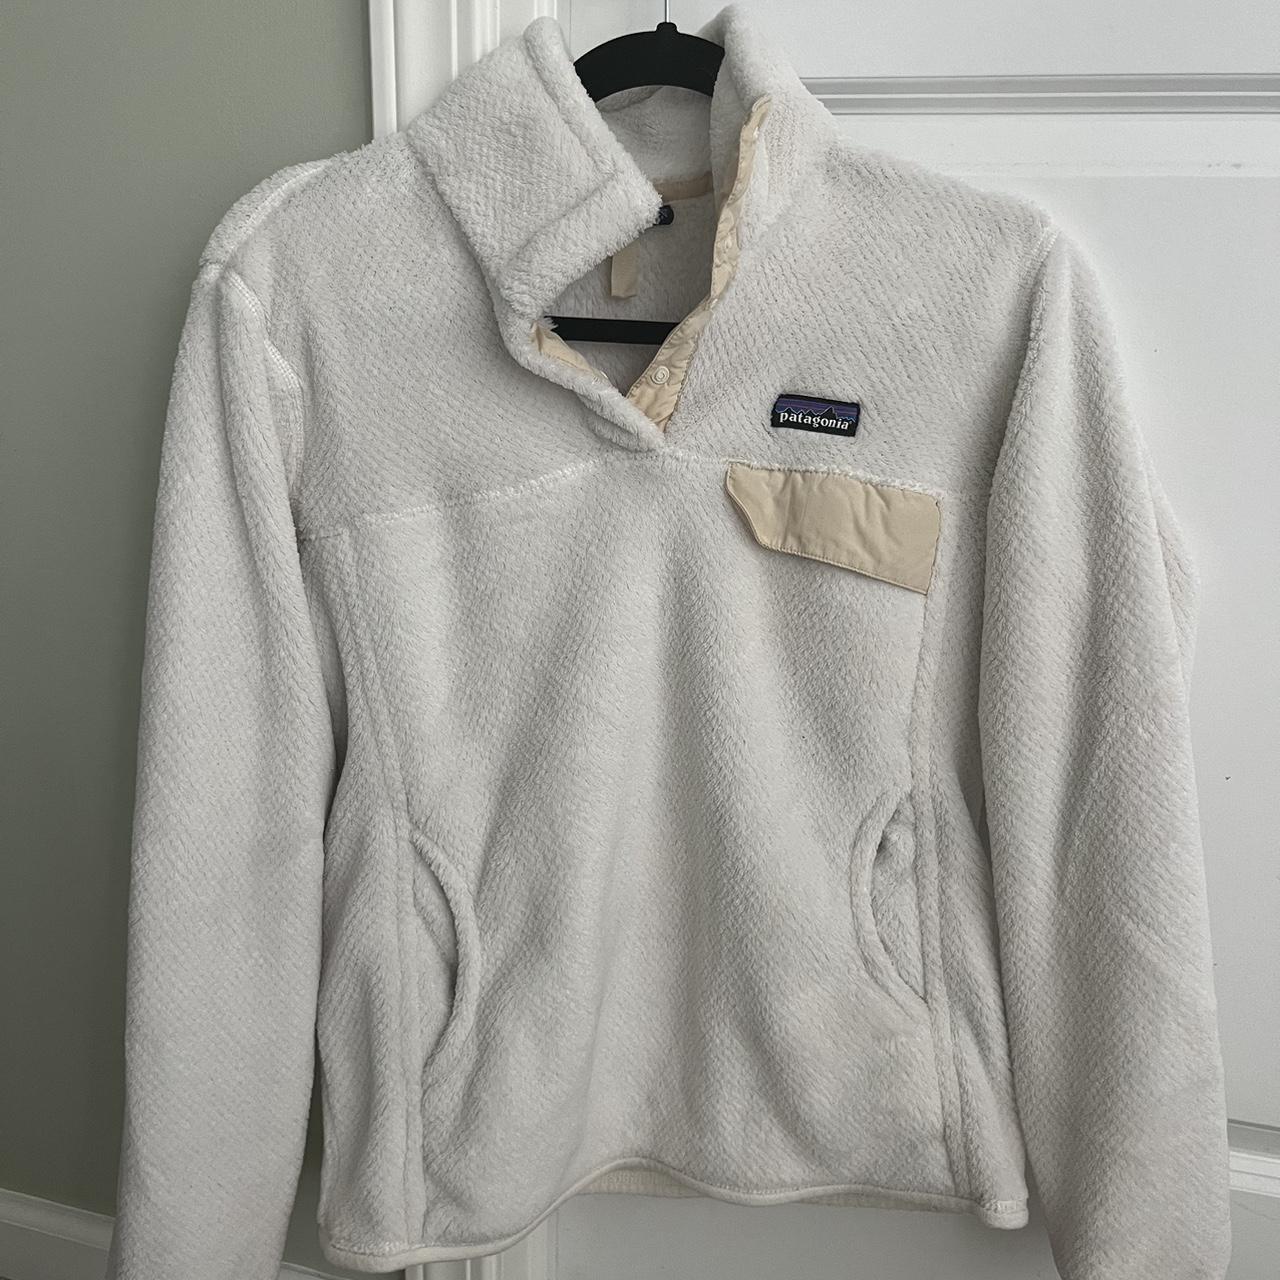 Patagonia white fleece, no stains like new size M - Depop